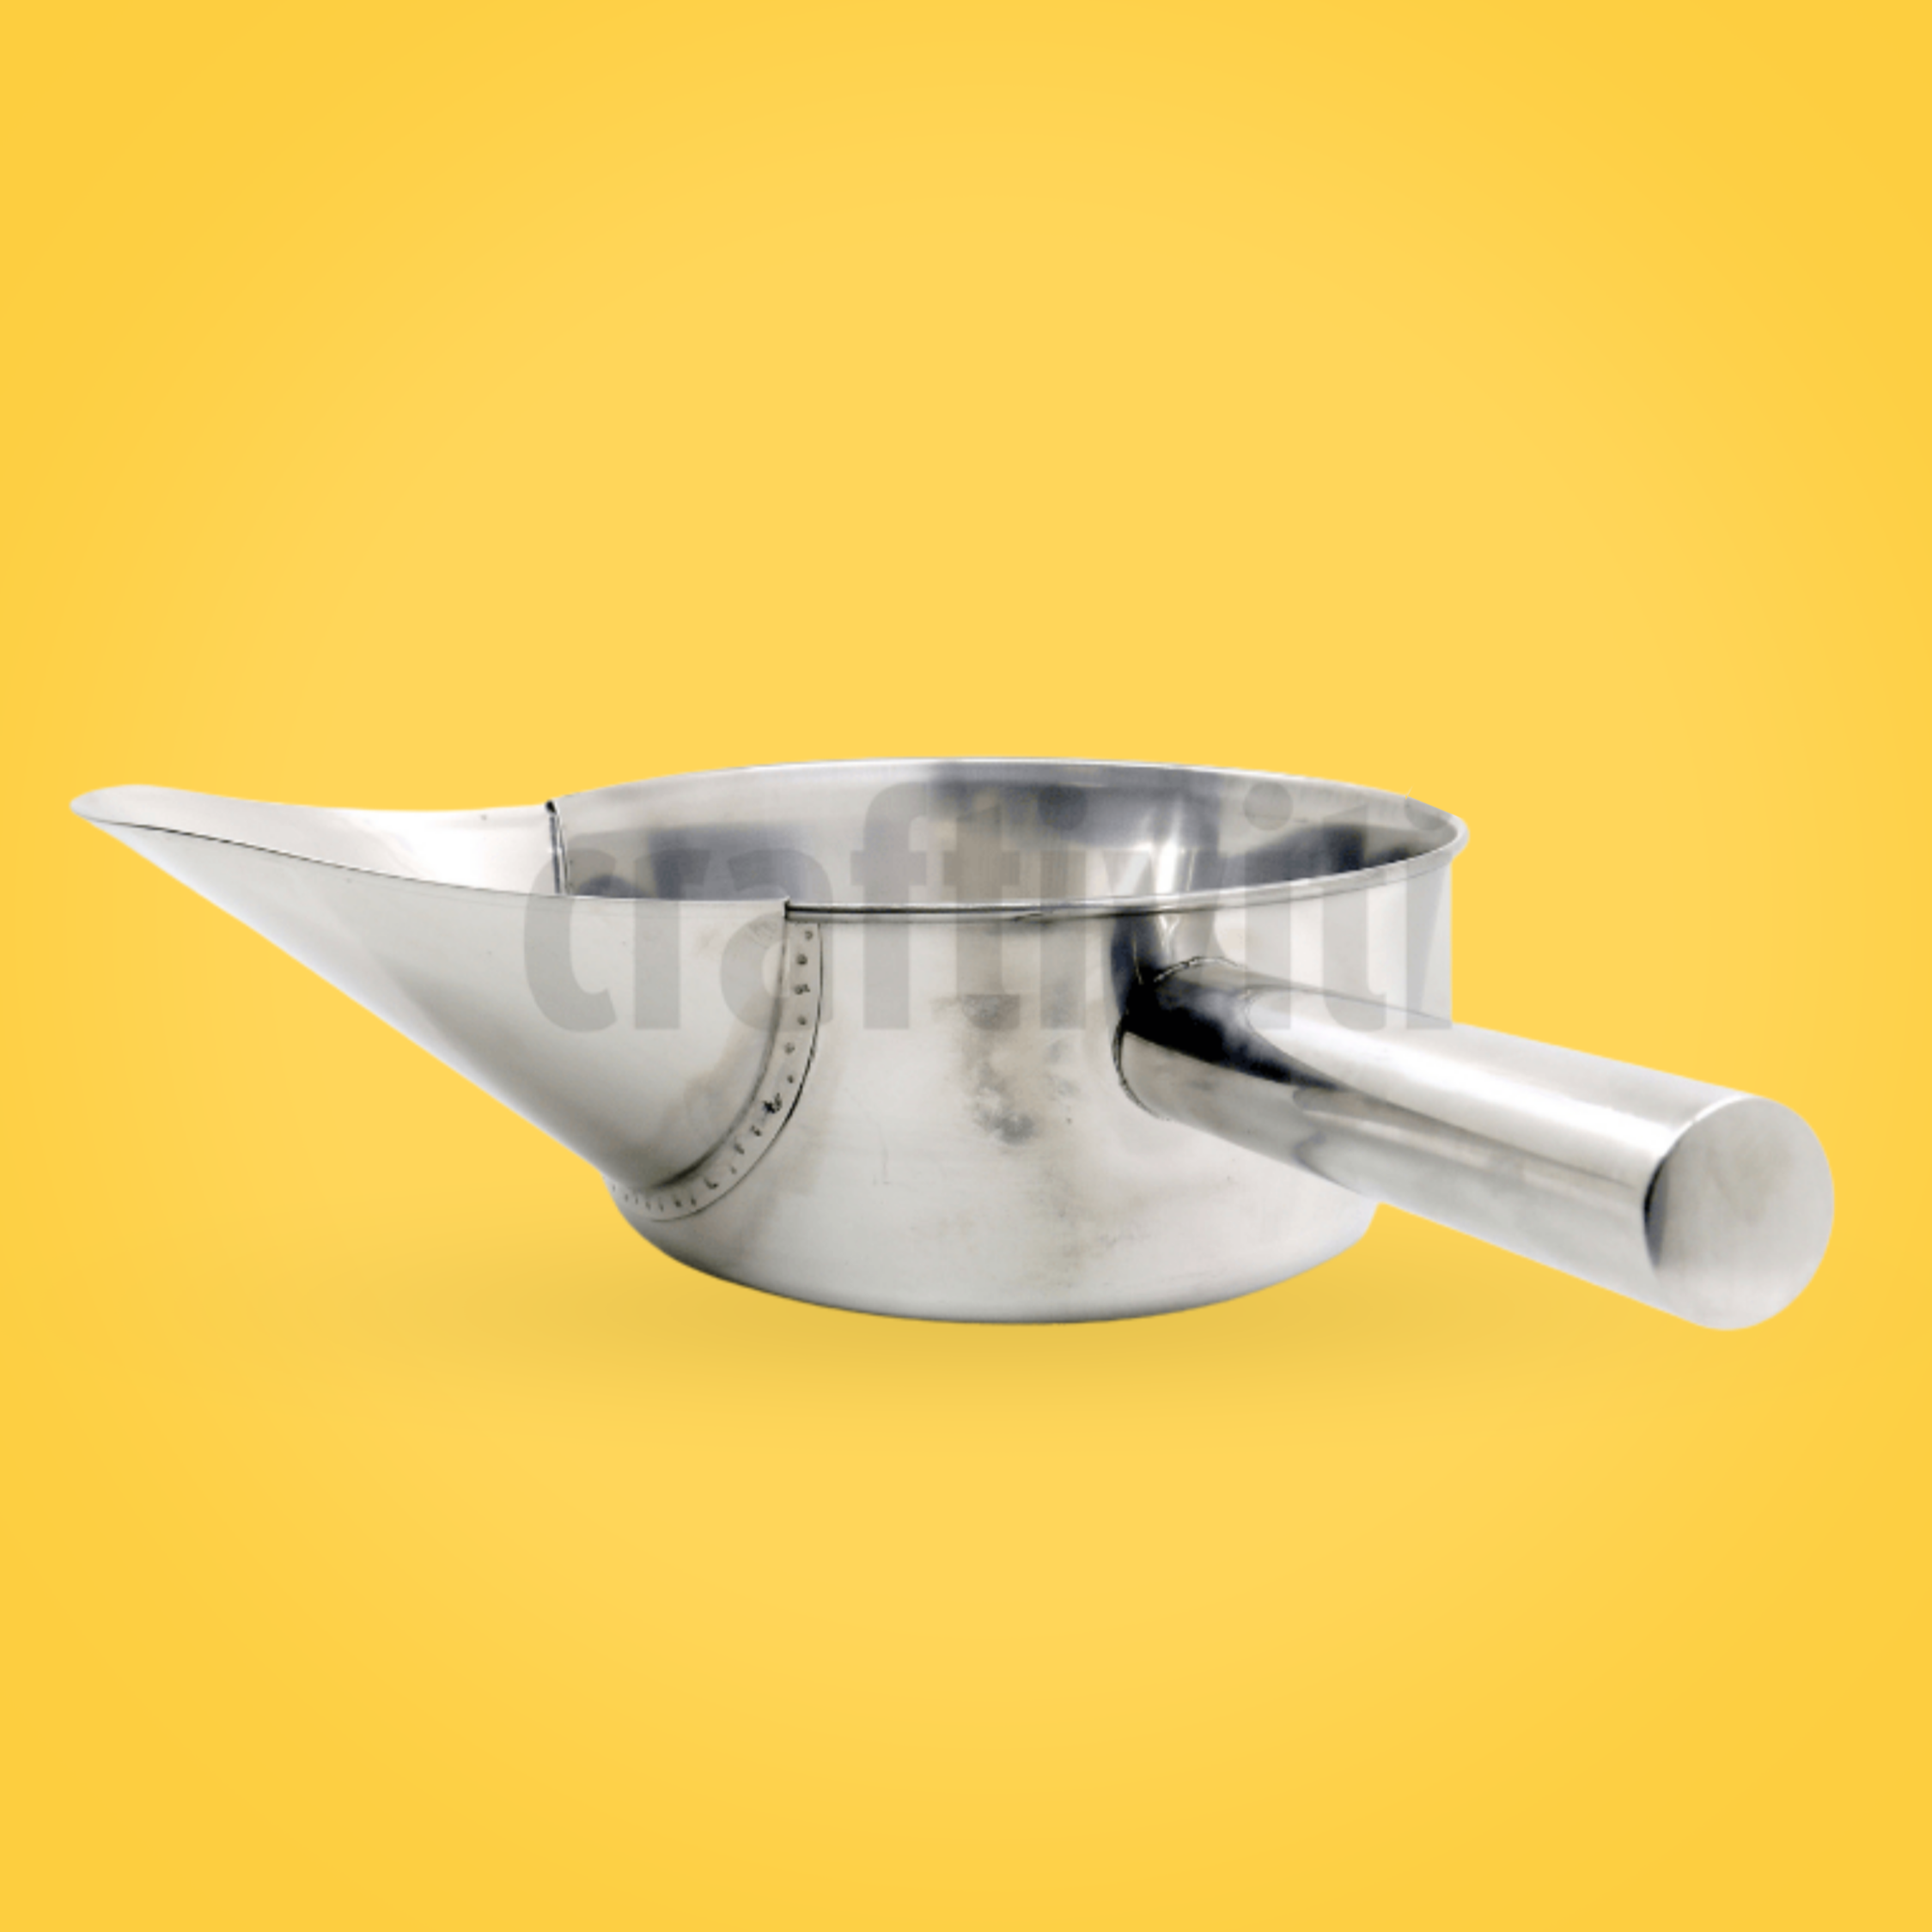 Stainless Steel Wax Pot with Pouring Spout - 19.9cm Diameter Tools - Craftiviti